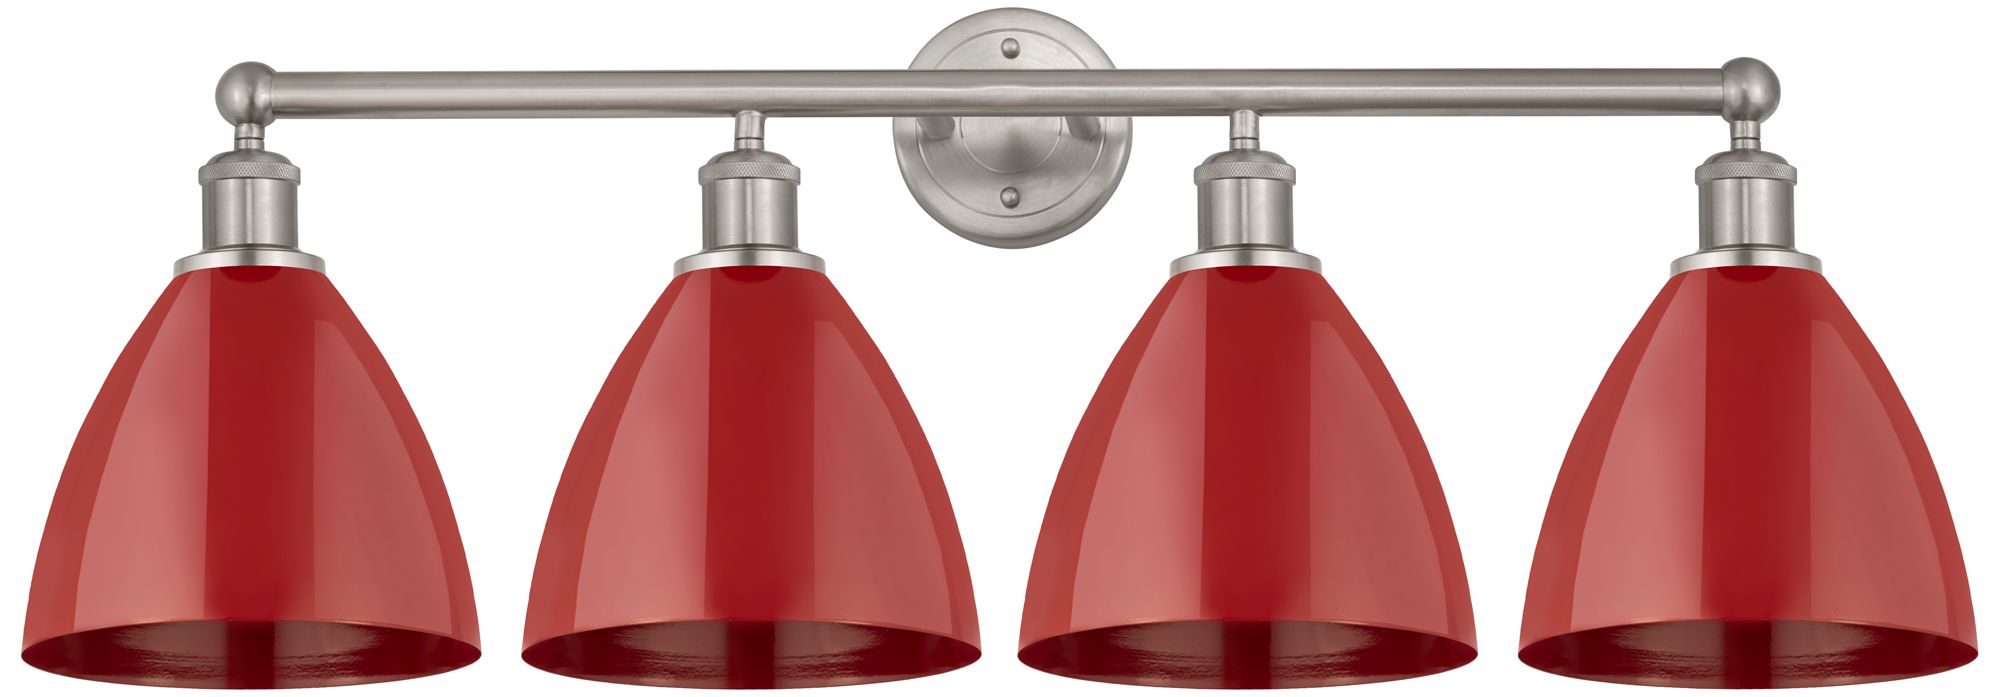 Plymouth Dome 35" 4-Light Brushed Satin Nickel Bath Light w/ Red Shade